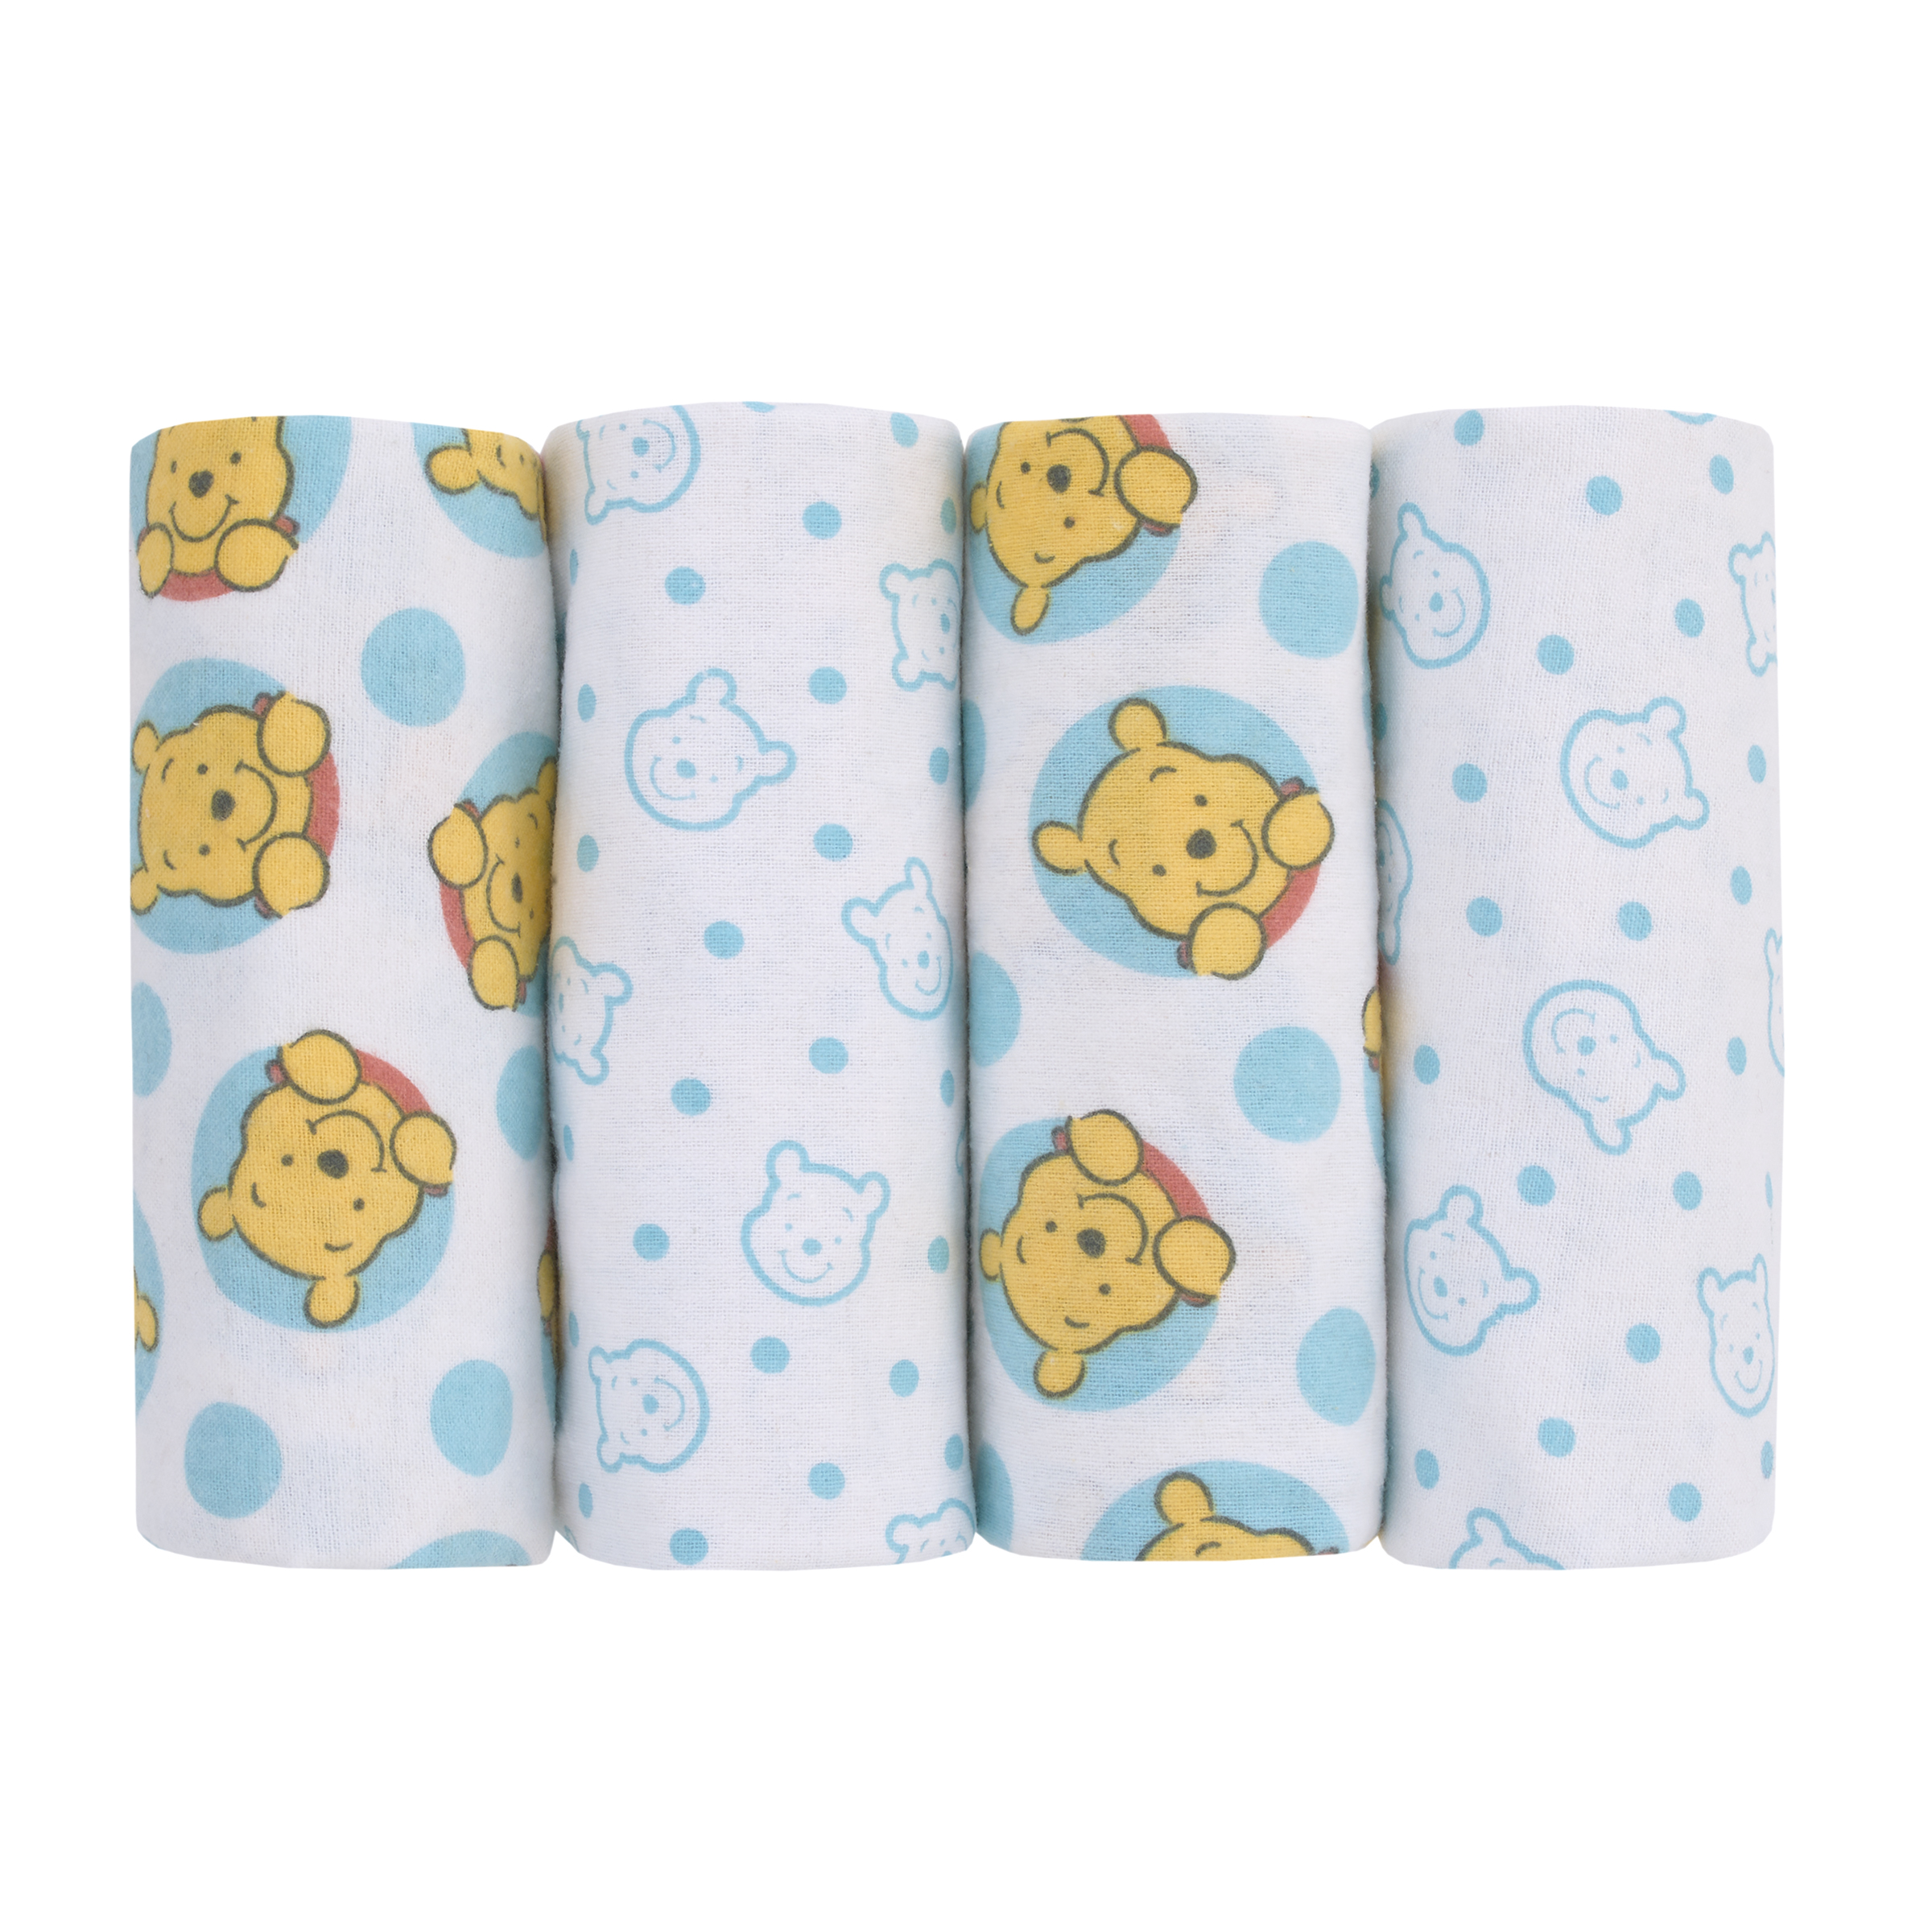 Disney Winnie the Pooh so Loved 4-PK Cotton Receiving Blankets, Yellow, Aqua, Boy and Girl Infant - image 3 of 8